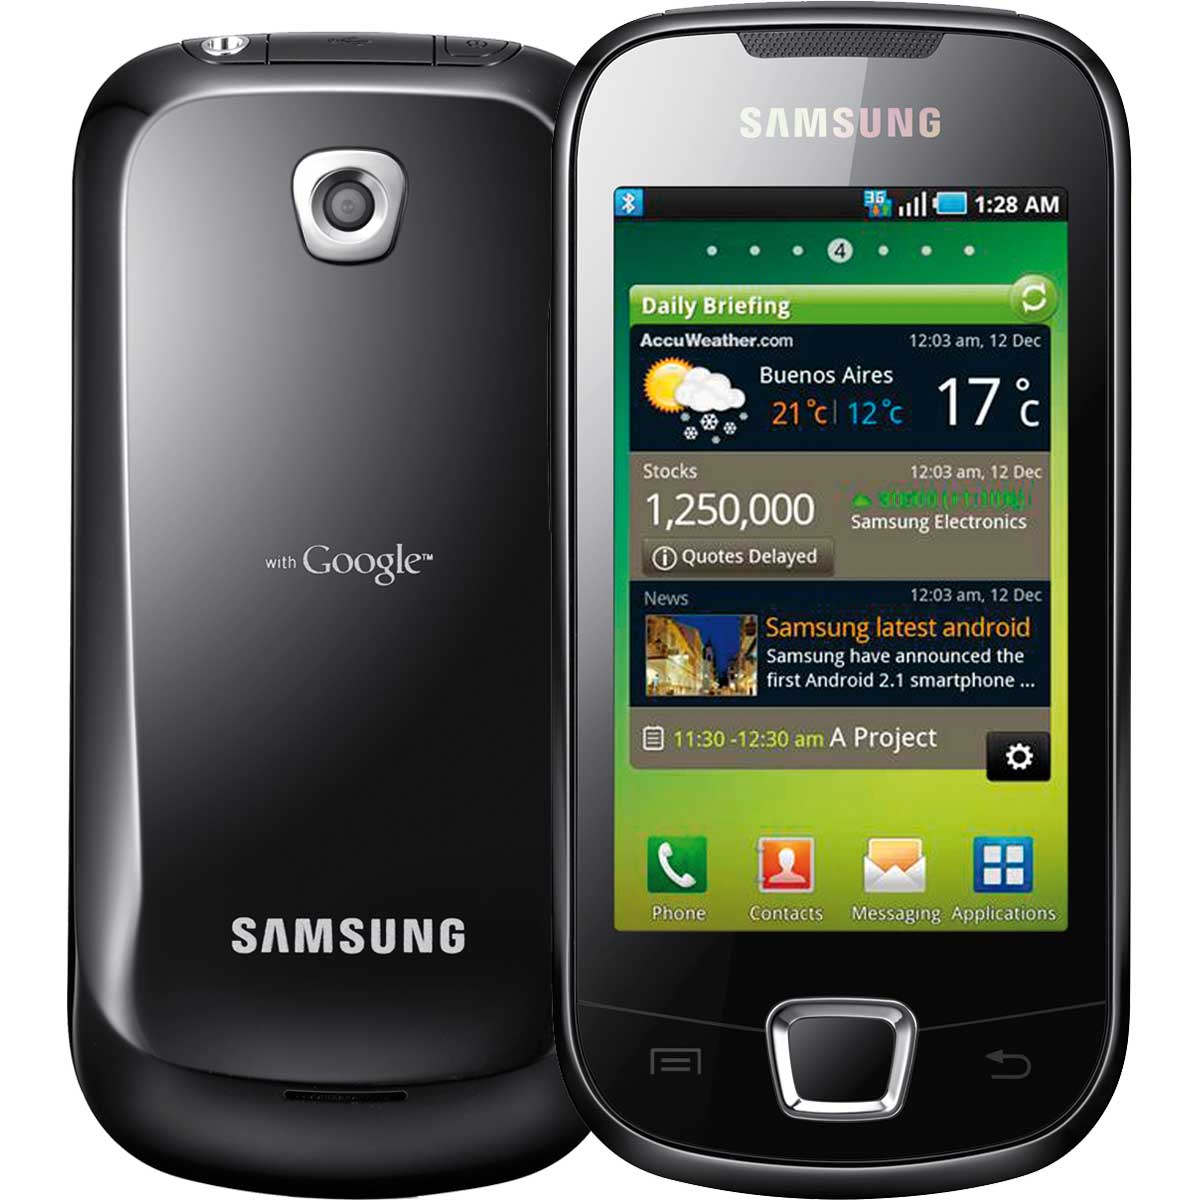 Samsung I5800 Galaxy 3 specs, review, release date - PhonesData